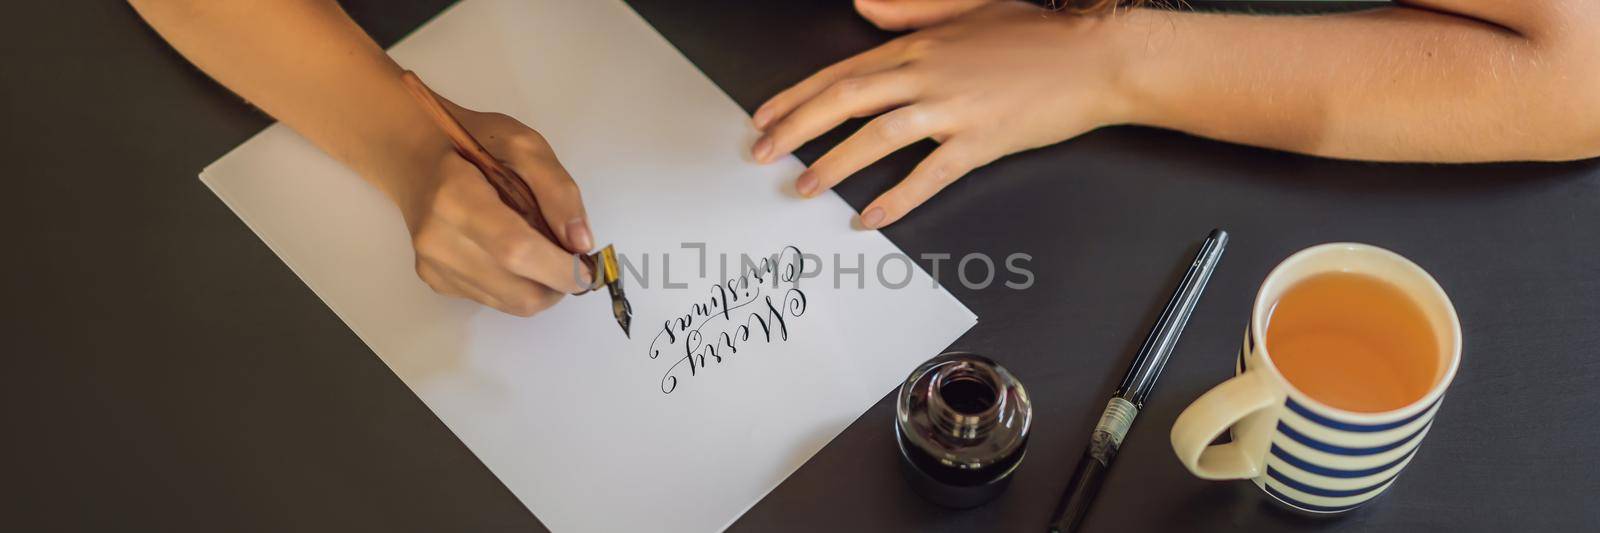 BANNER, LONG FORMAT Merry christmas and a happy new year. Calligrapher Young Woman writes phrase on white paper. Inscribing ornamental decorated letters. Calligraphy, graphic design, lettering, handwriting, creation concept.